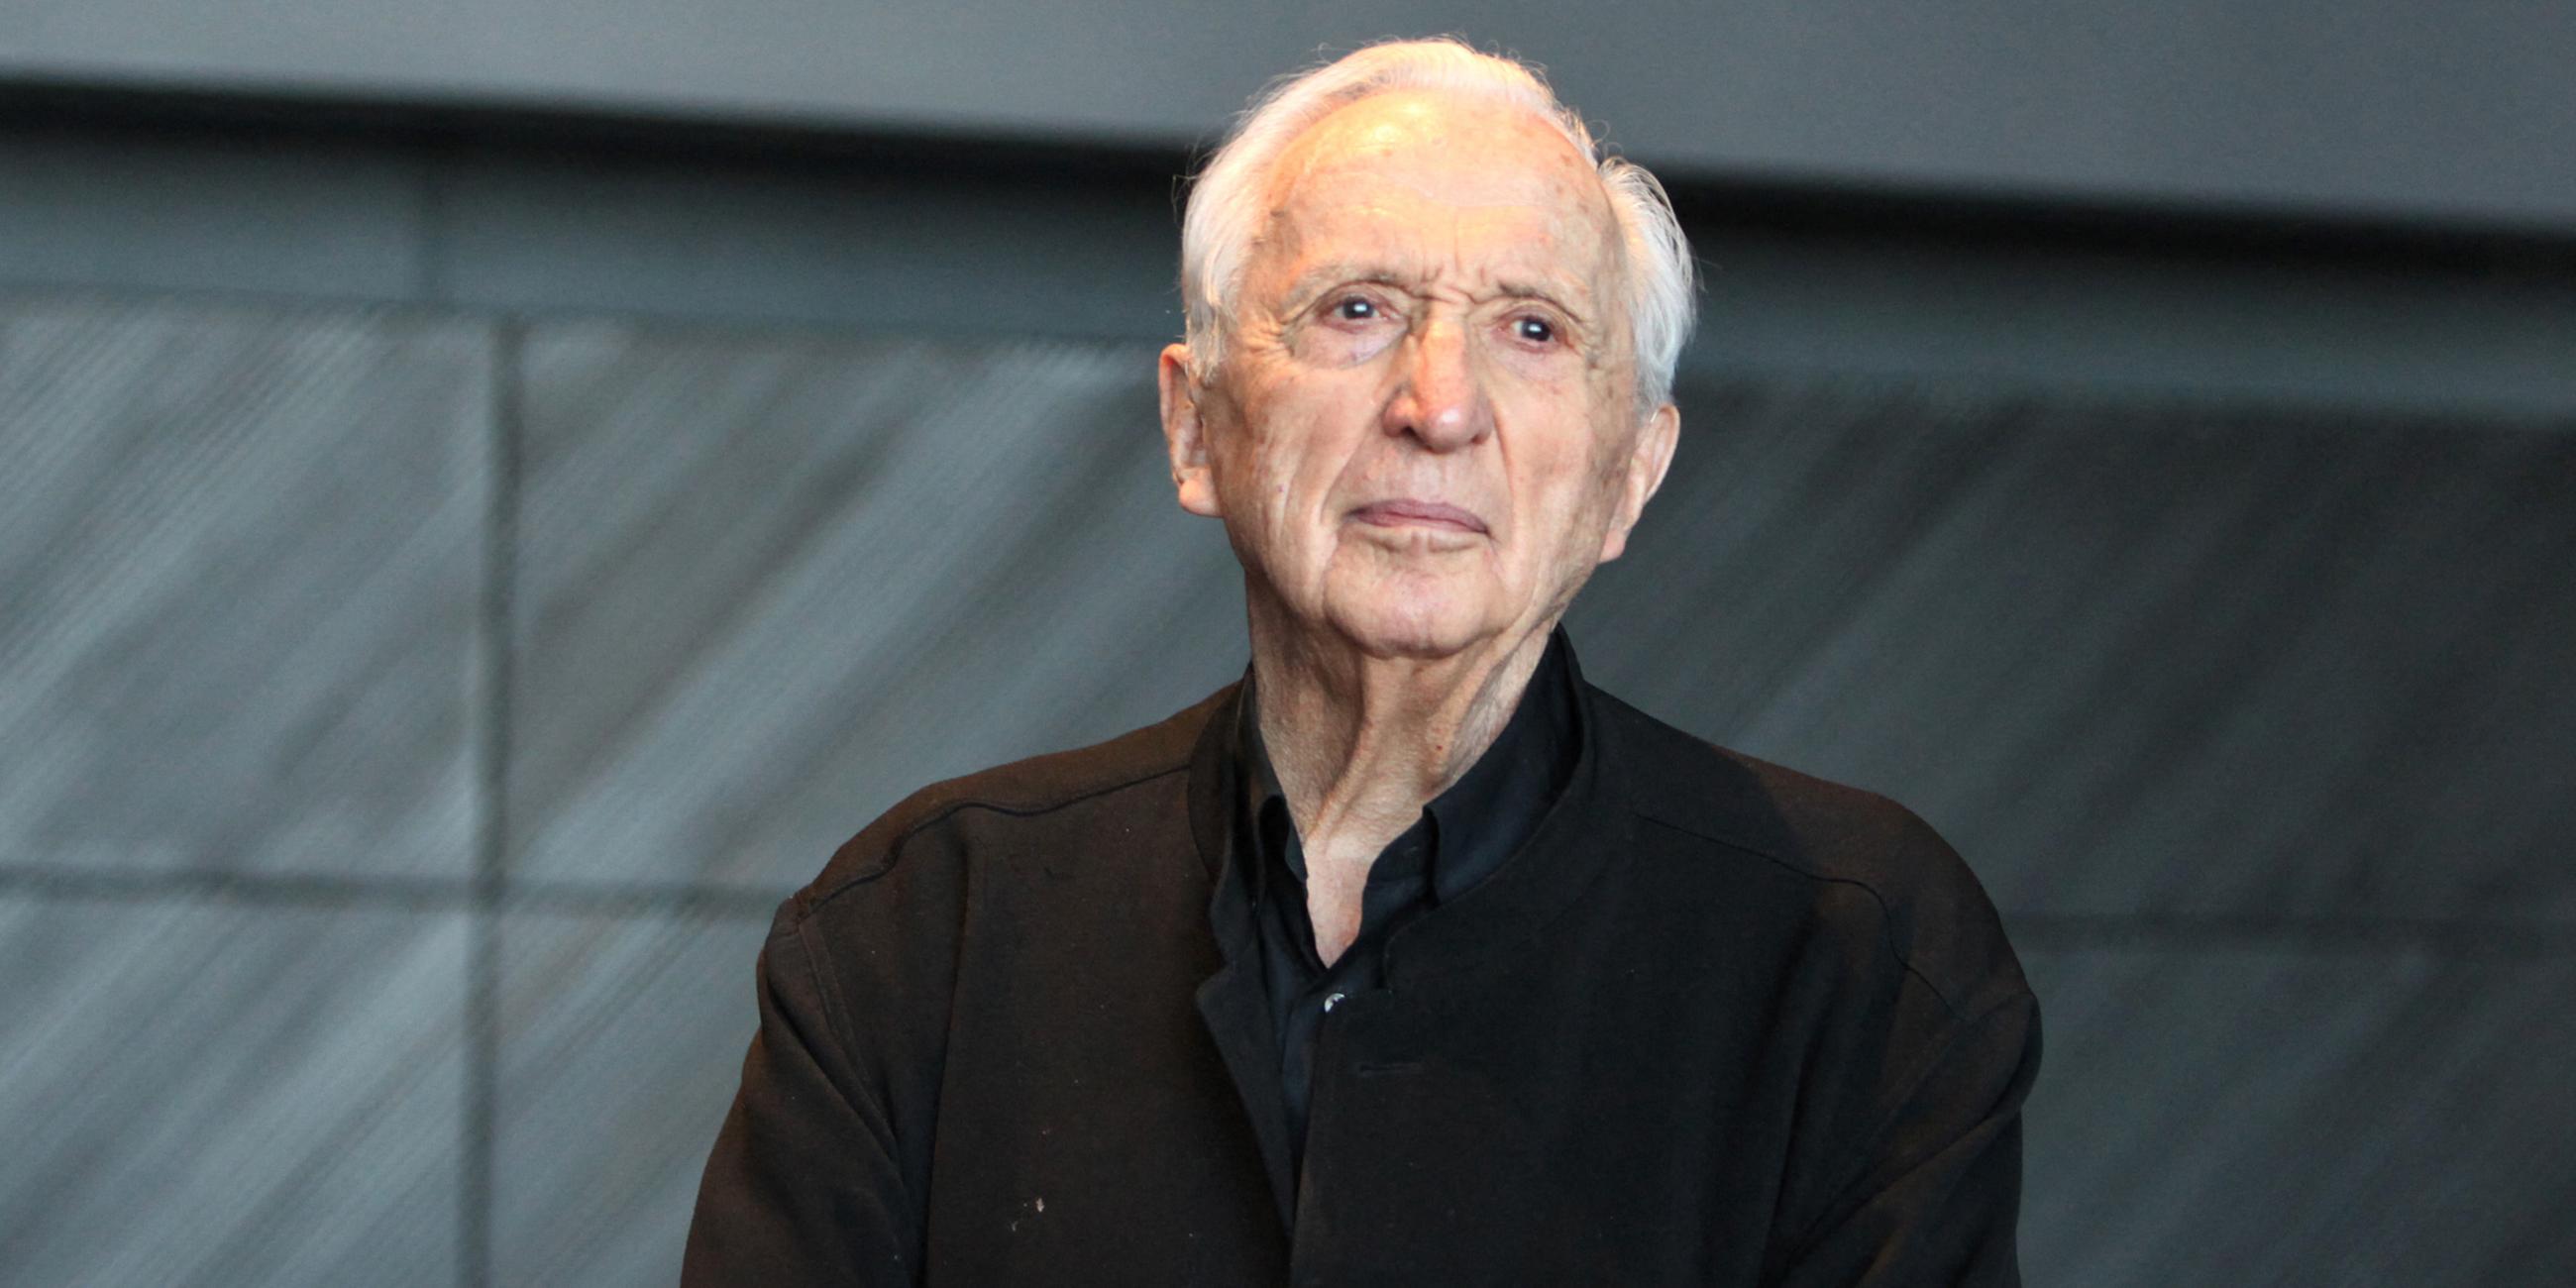 Archiv: Pierre Soulages am 31.05.2014 in New York